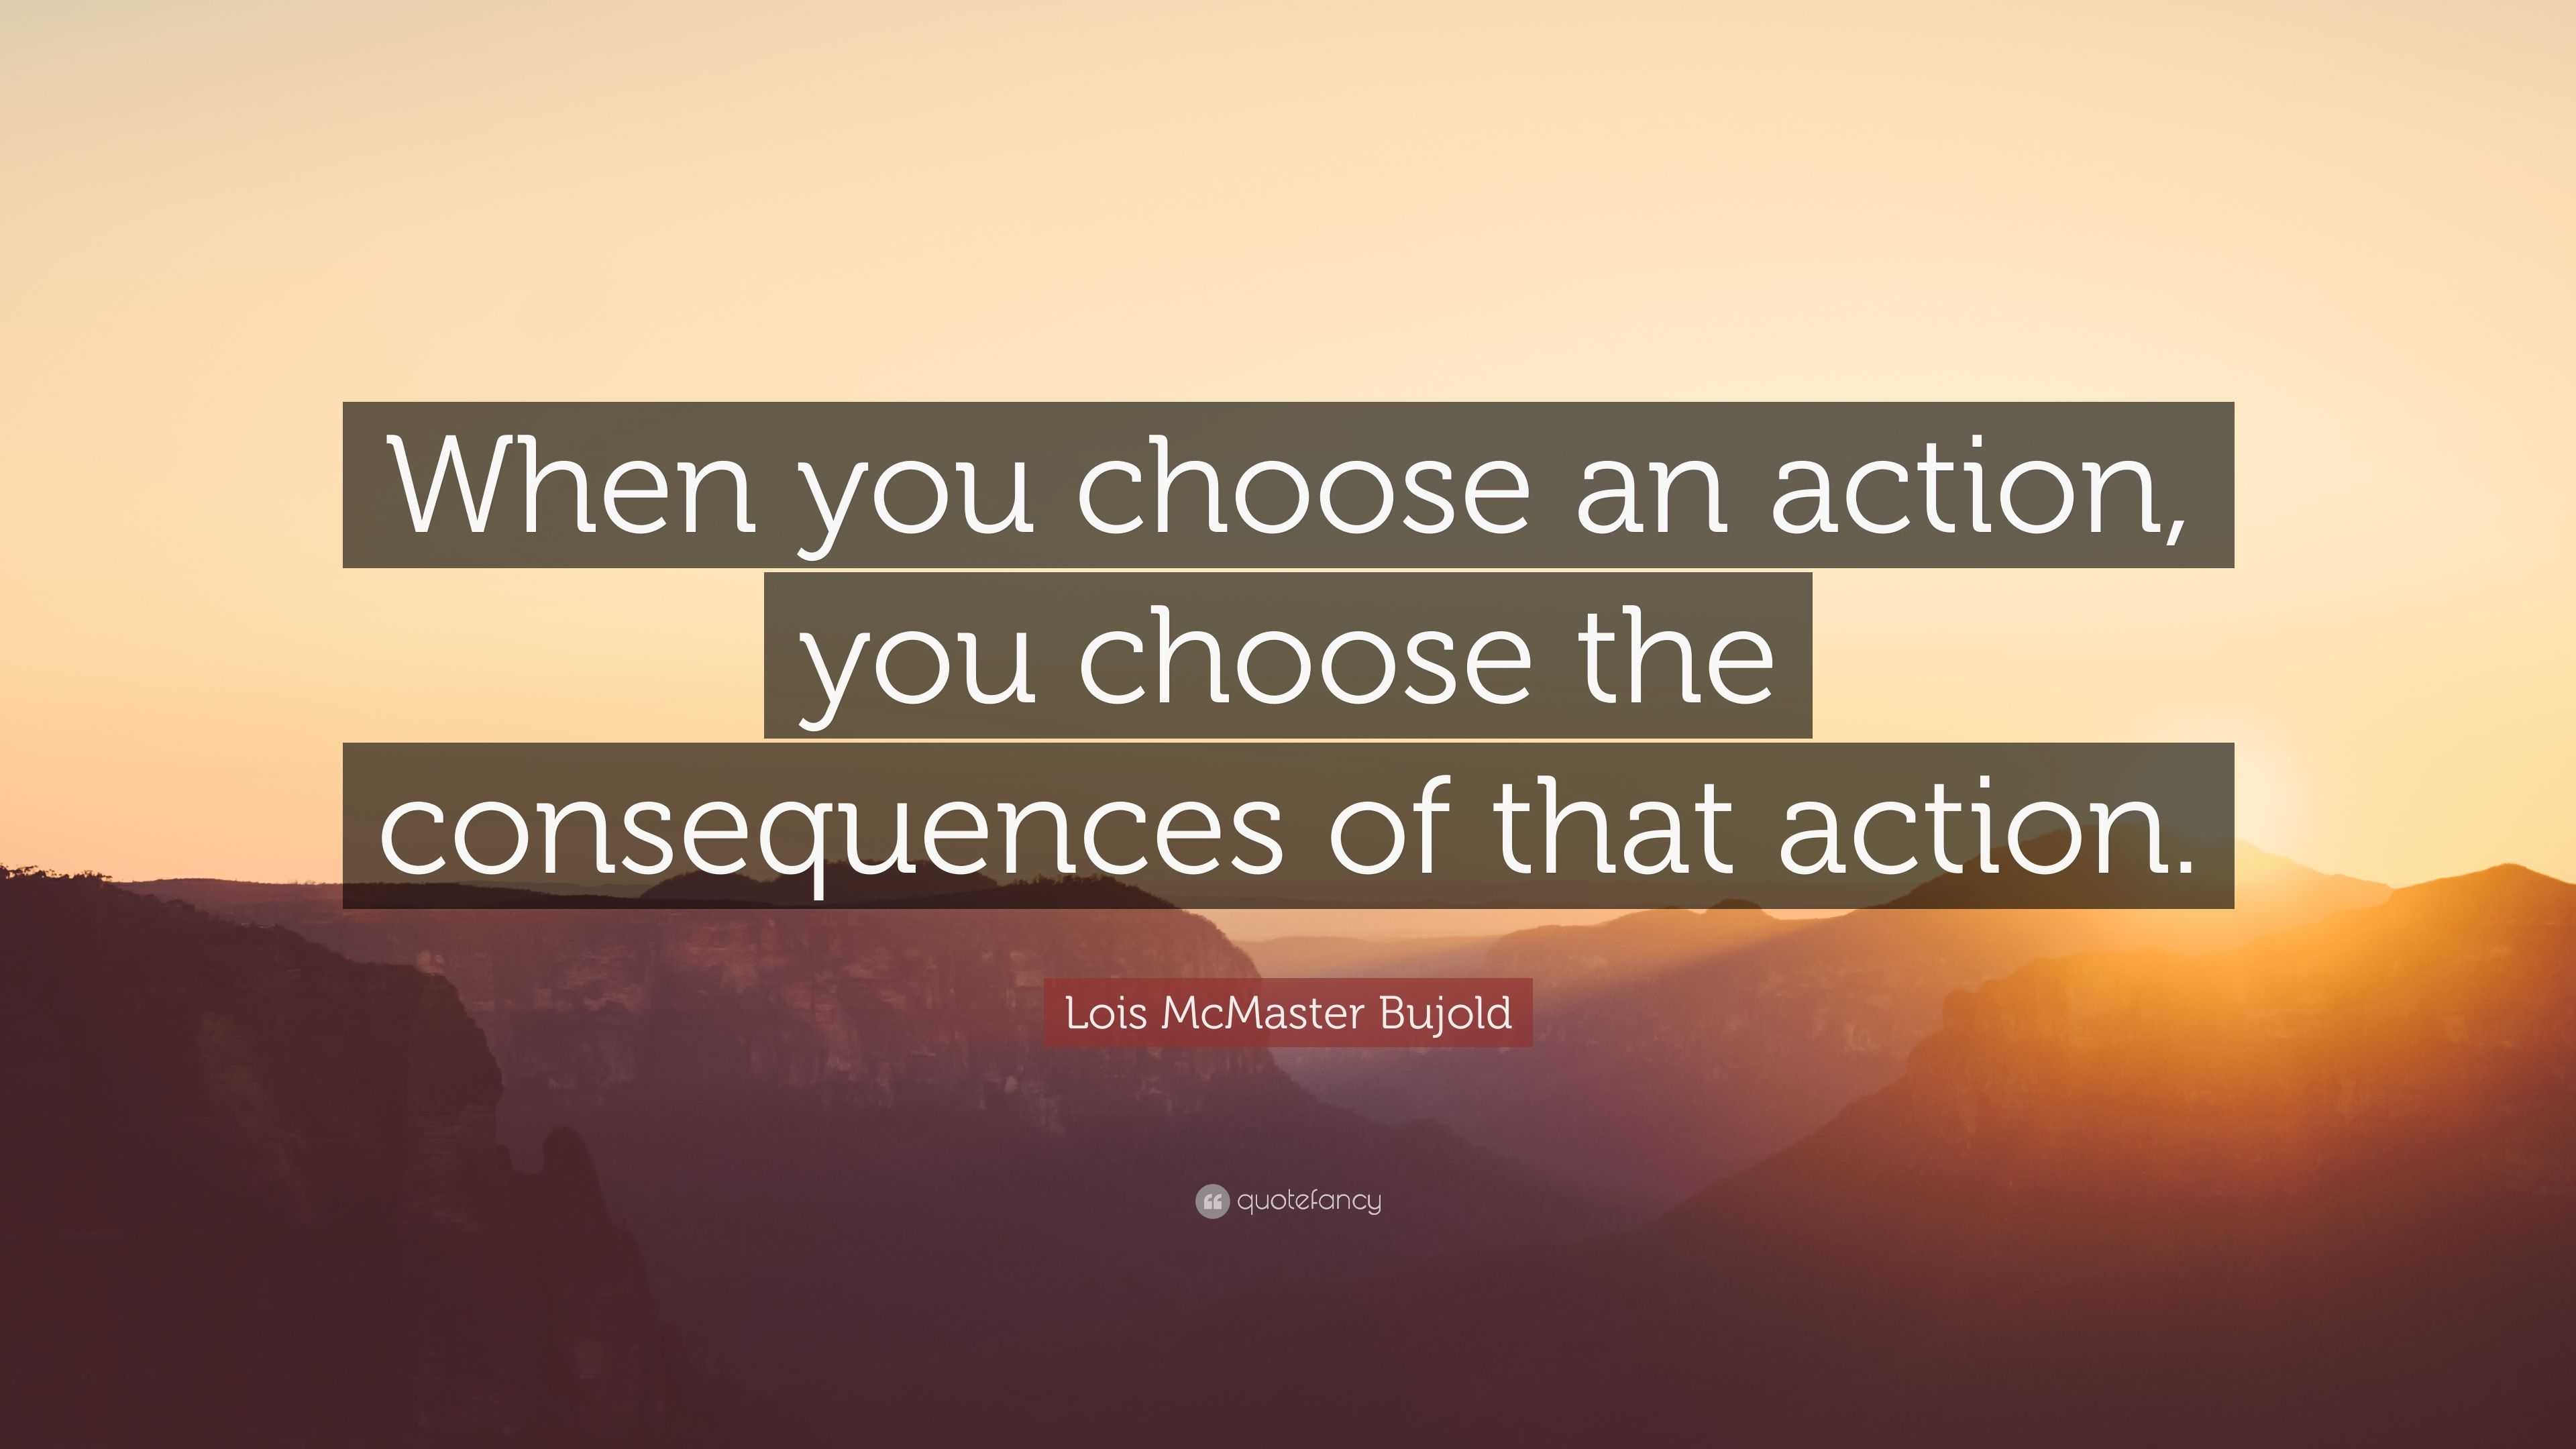 Lois McMaster Bujold Quote: “When you choose an action, you choose the ...